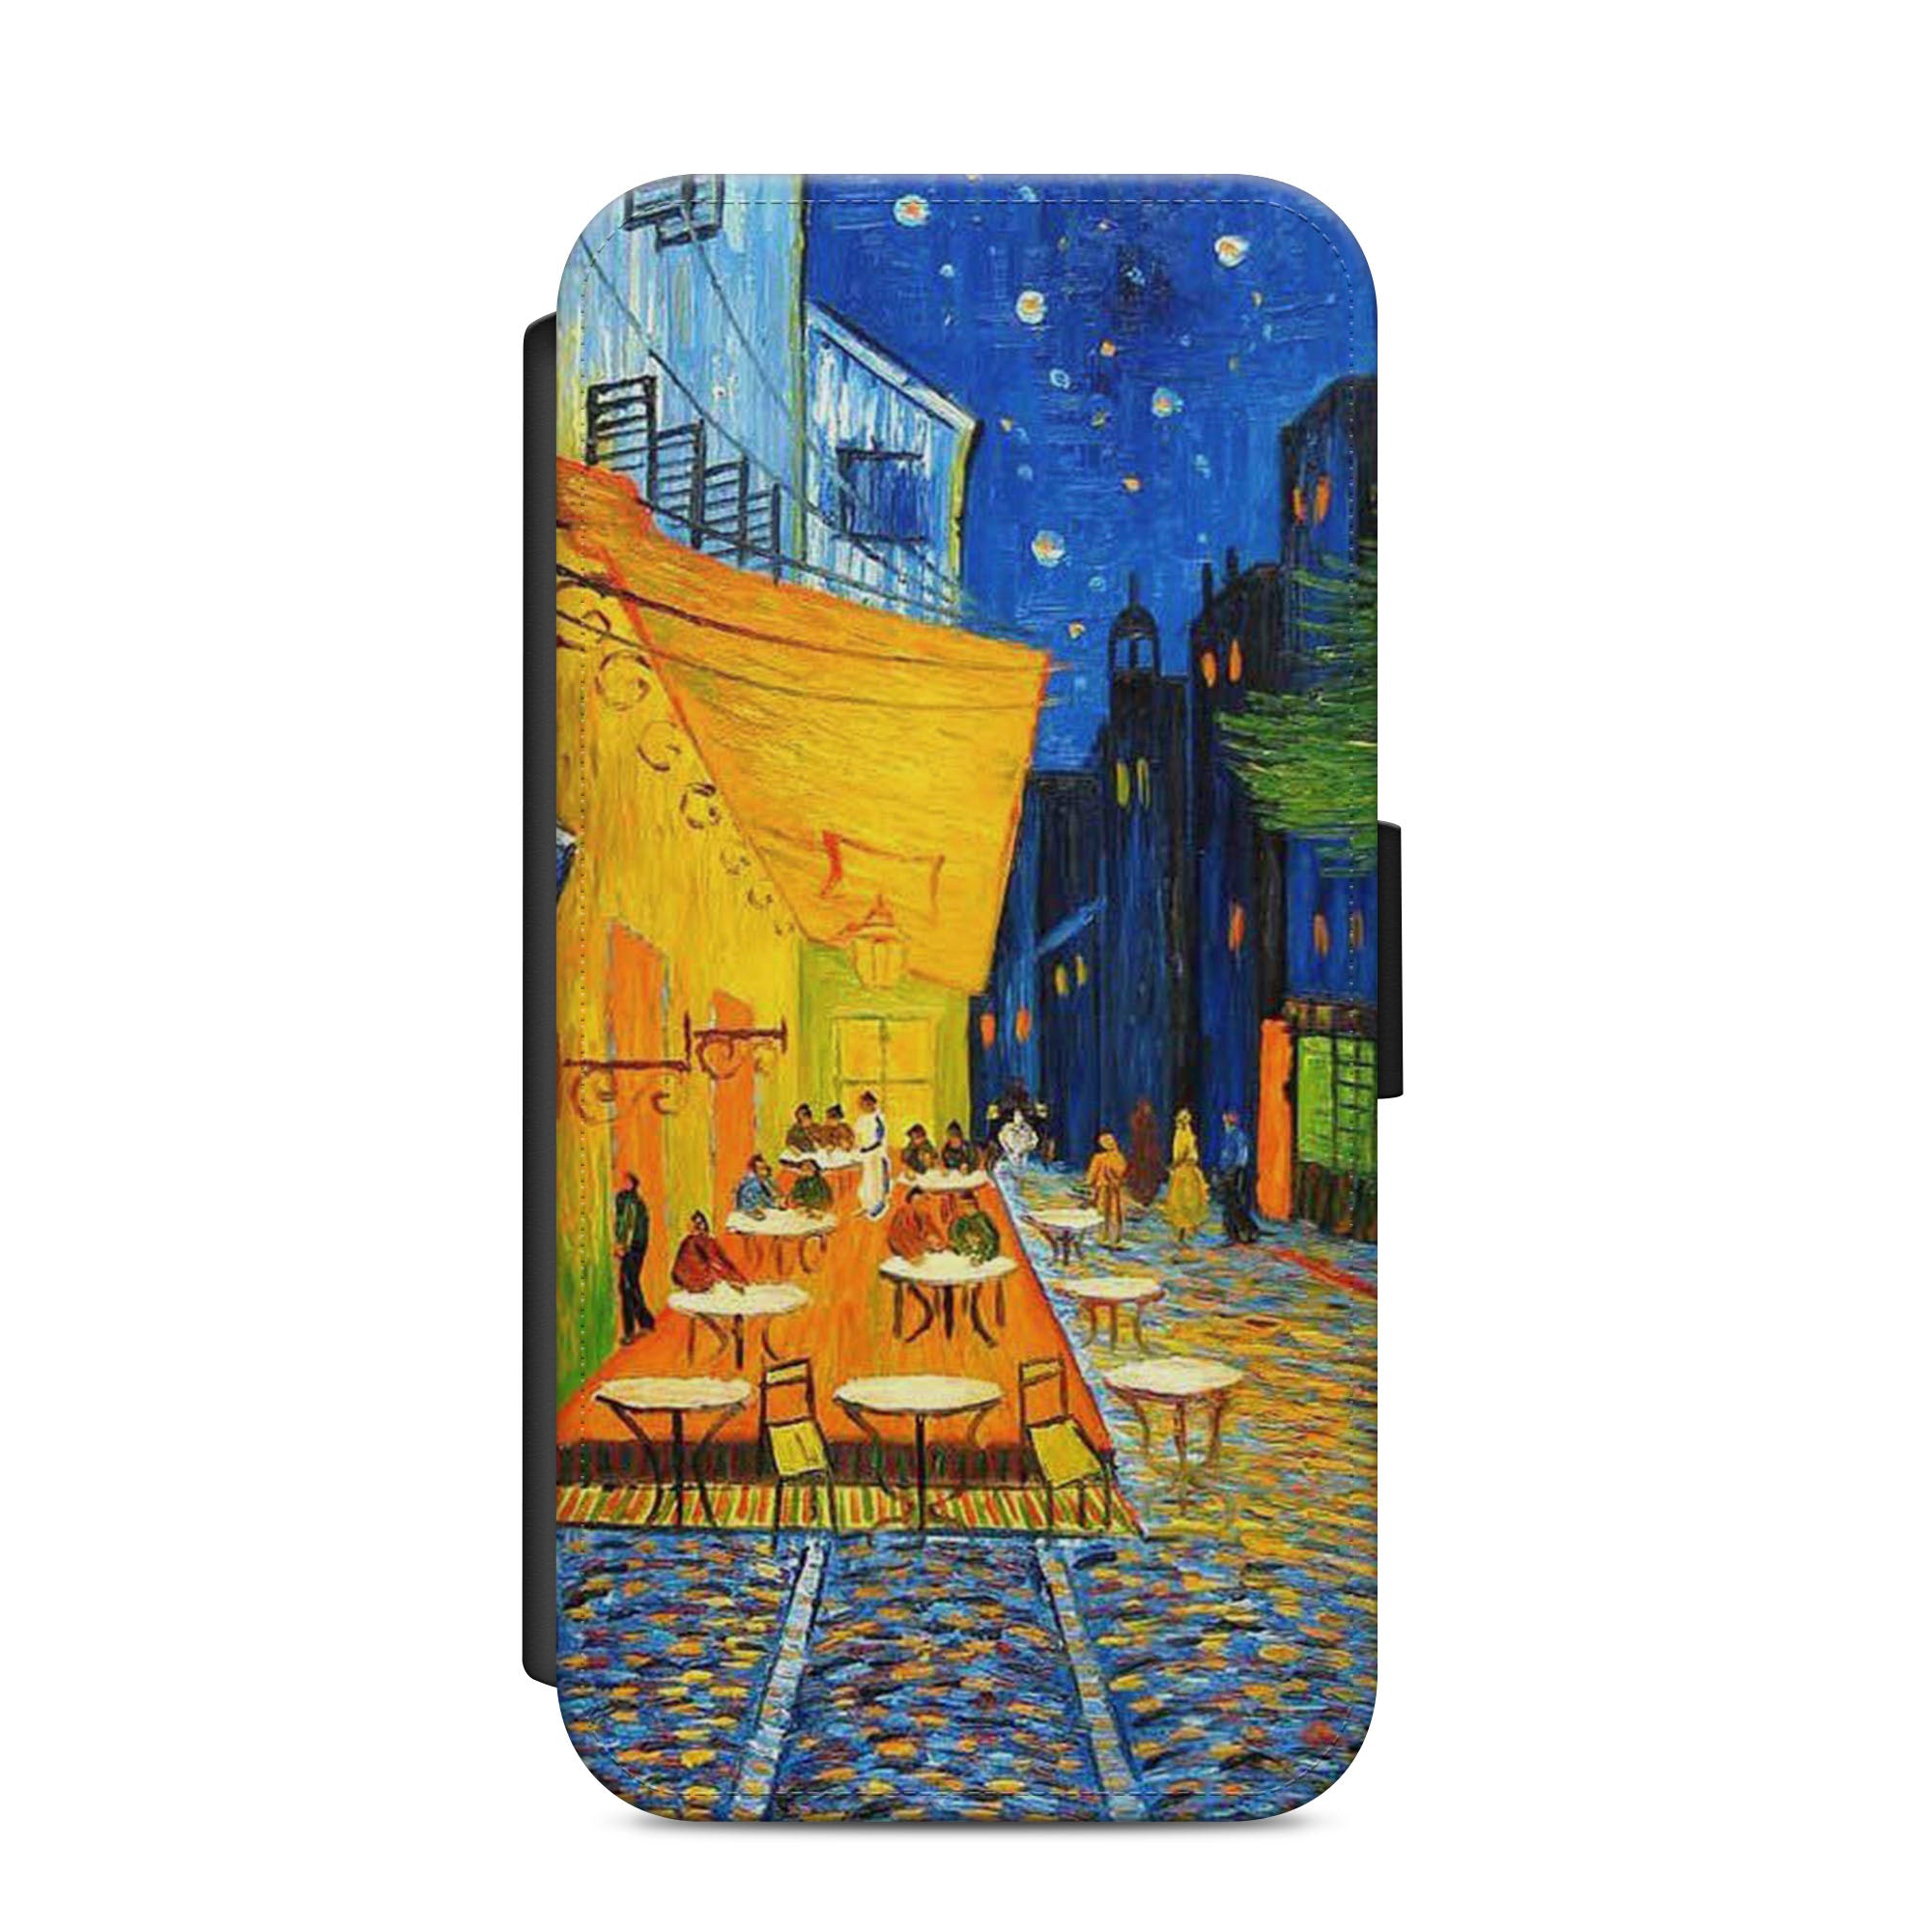 Van Gogh Print Faux Leather Flip Case Wallet for iPhone / Samsung